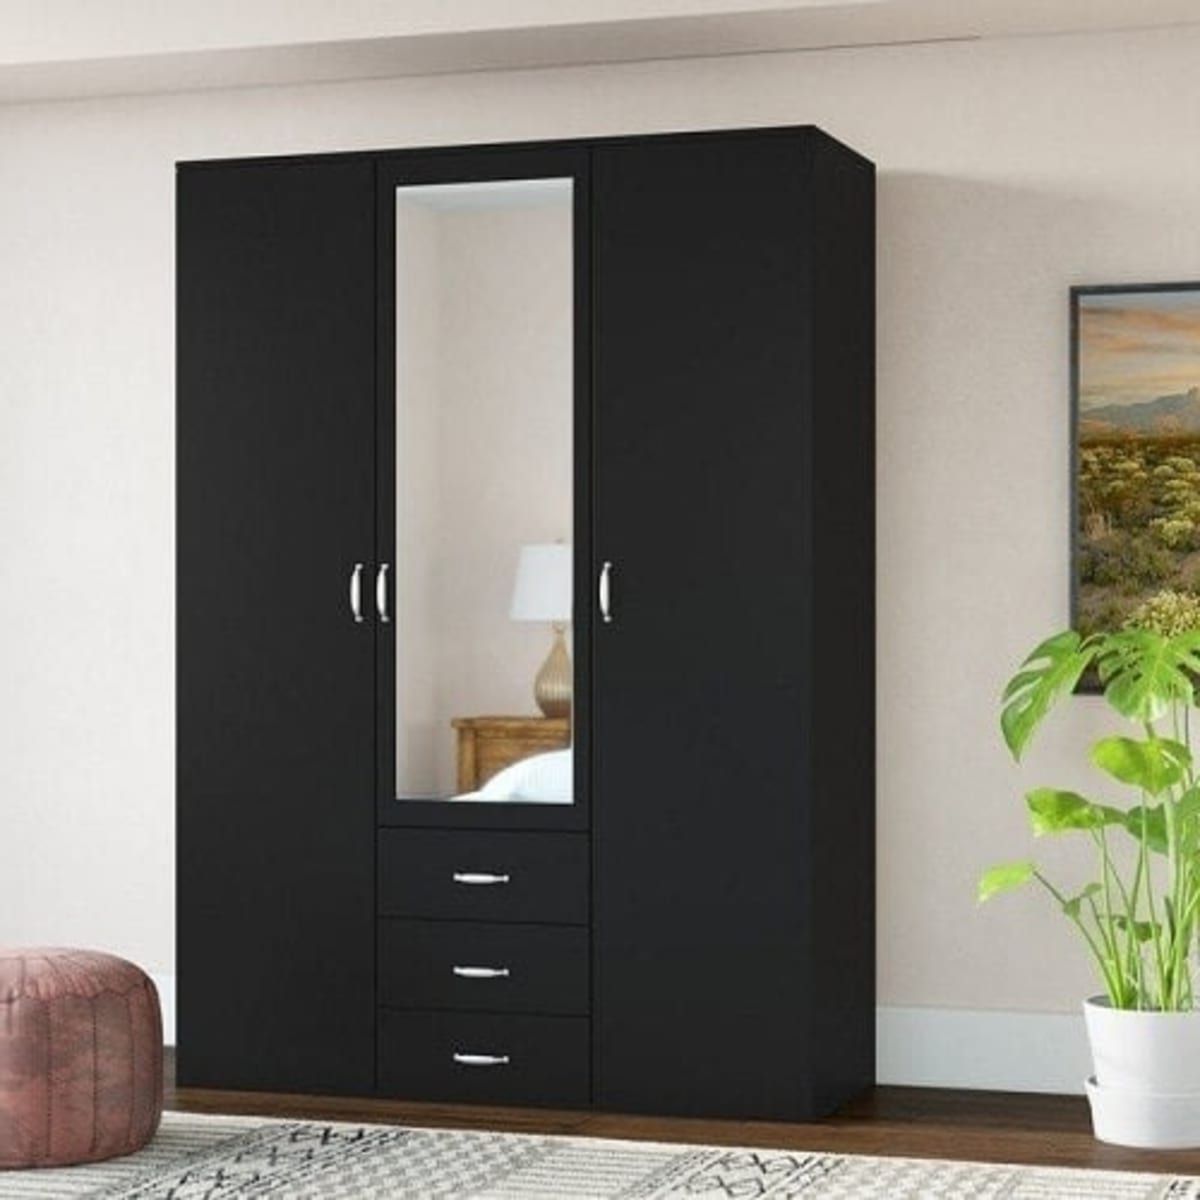 Beyond 3 Door Wardrobe With 3 Drawer And Mirror Black (View 10 of 10)